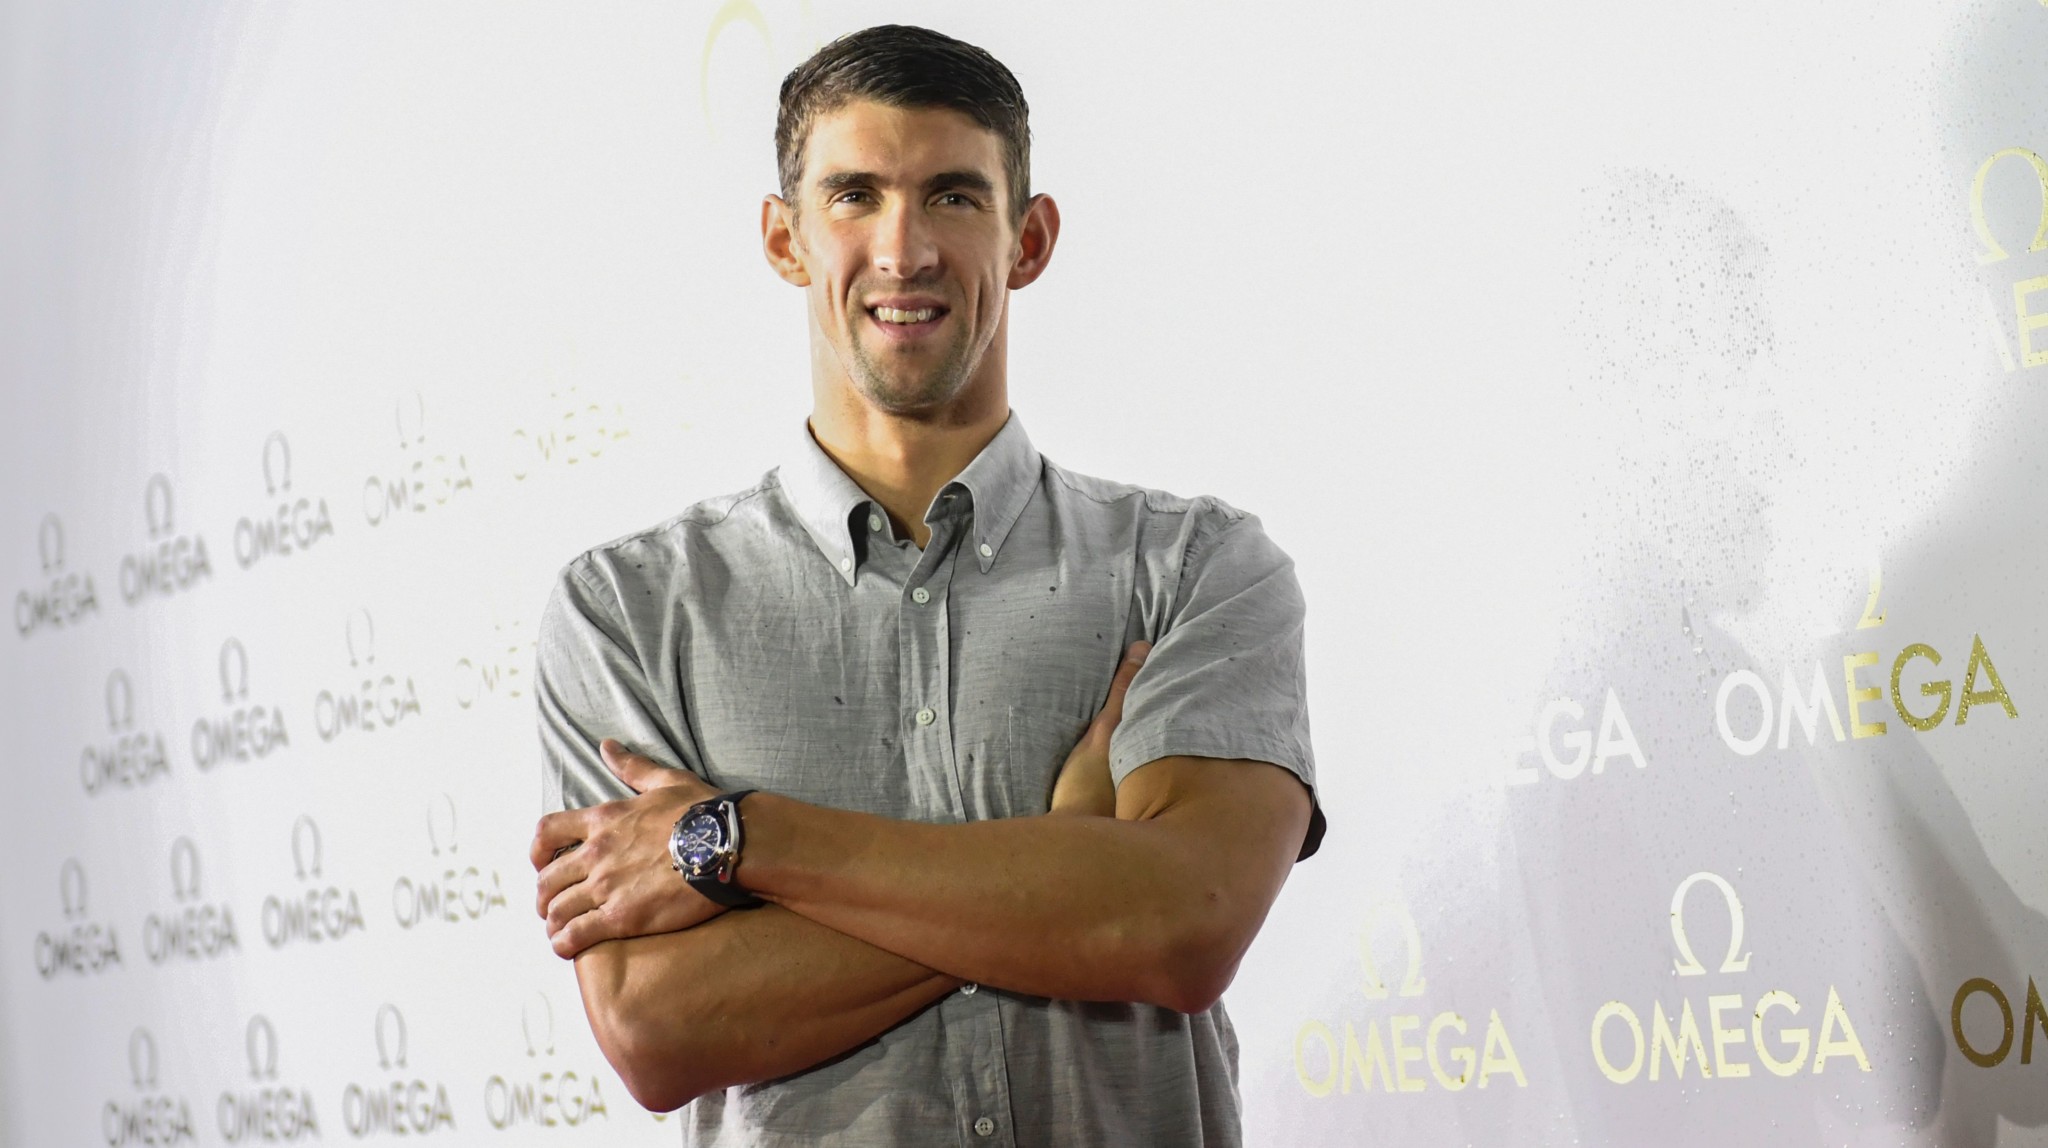 Michael phelps pose for photographers at an omega promotional event in rio de janeiro, brazil, august 15, 2016. Afp photo/ martin bernetti michael phelps ended his swimming legend's career with 23 olympic gold medals at the rio games. / afp / martin bernetti (photo credit should read martin bernetti/afp/getty images)